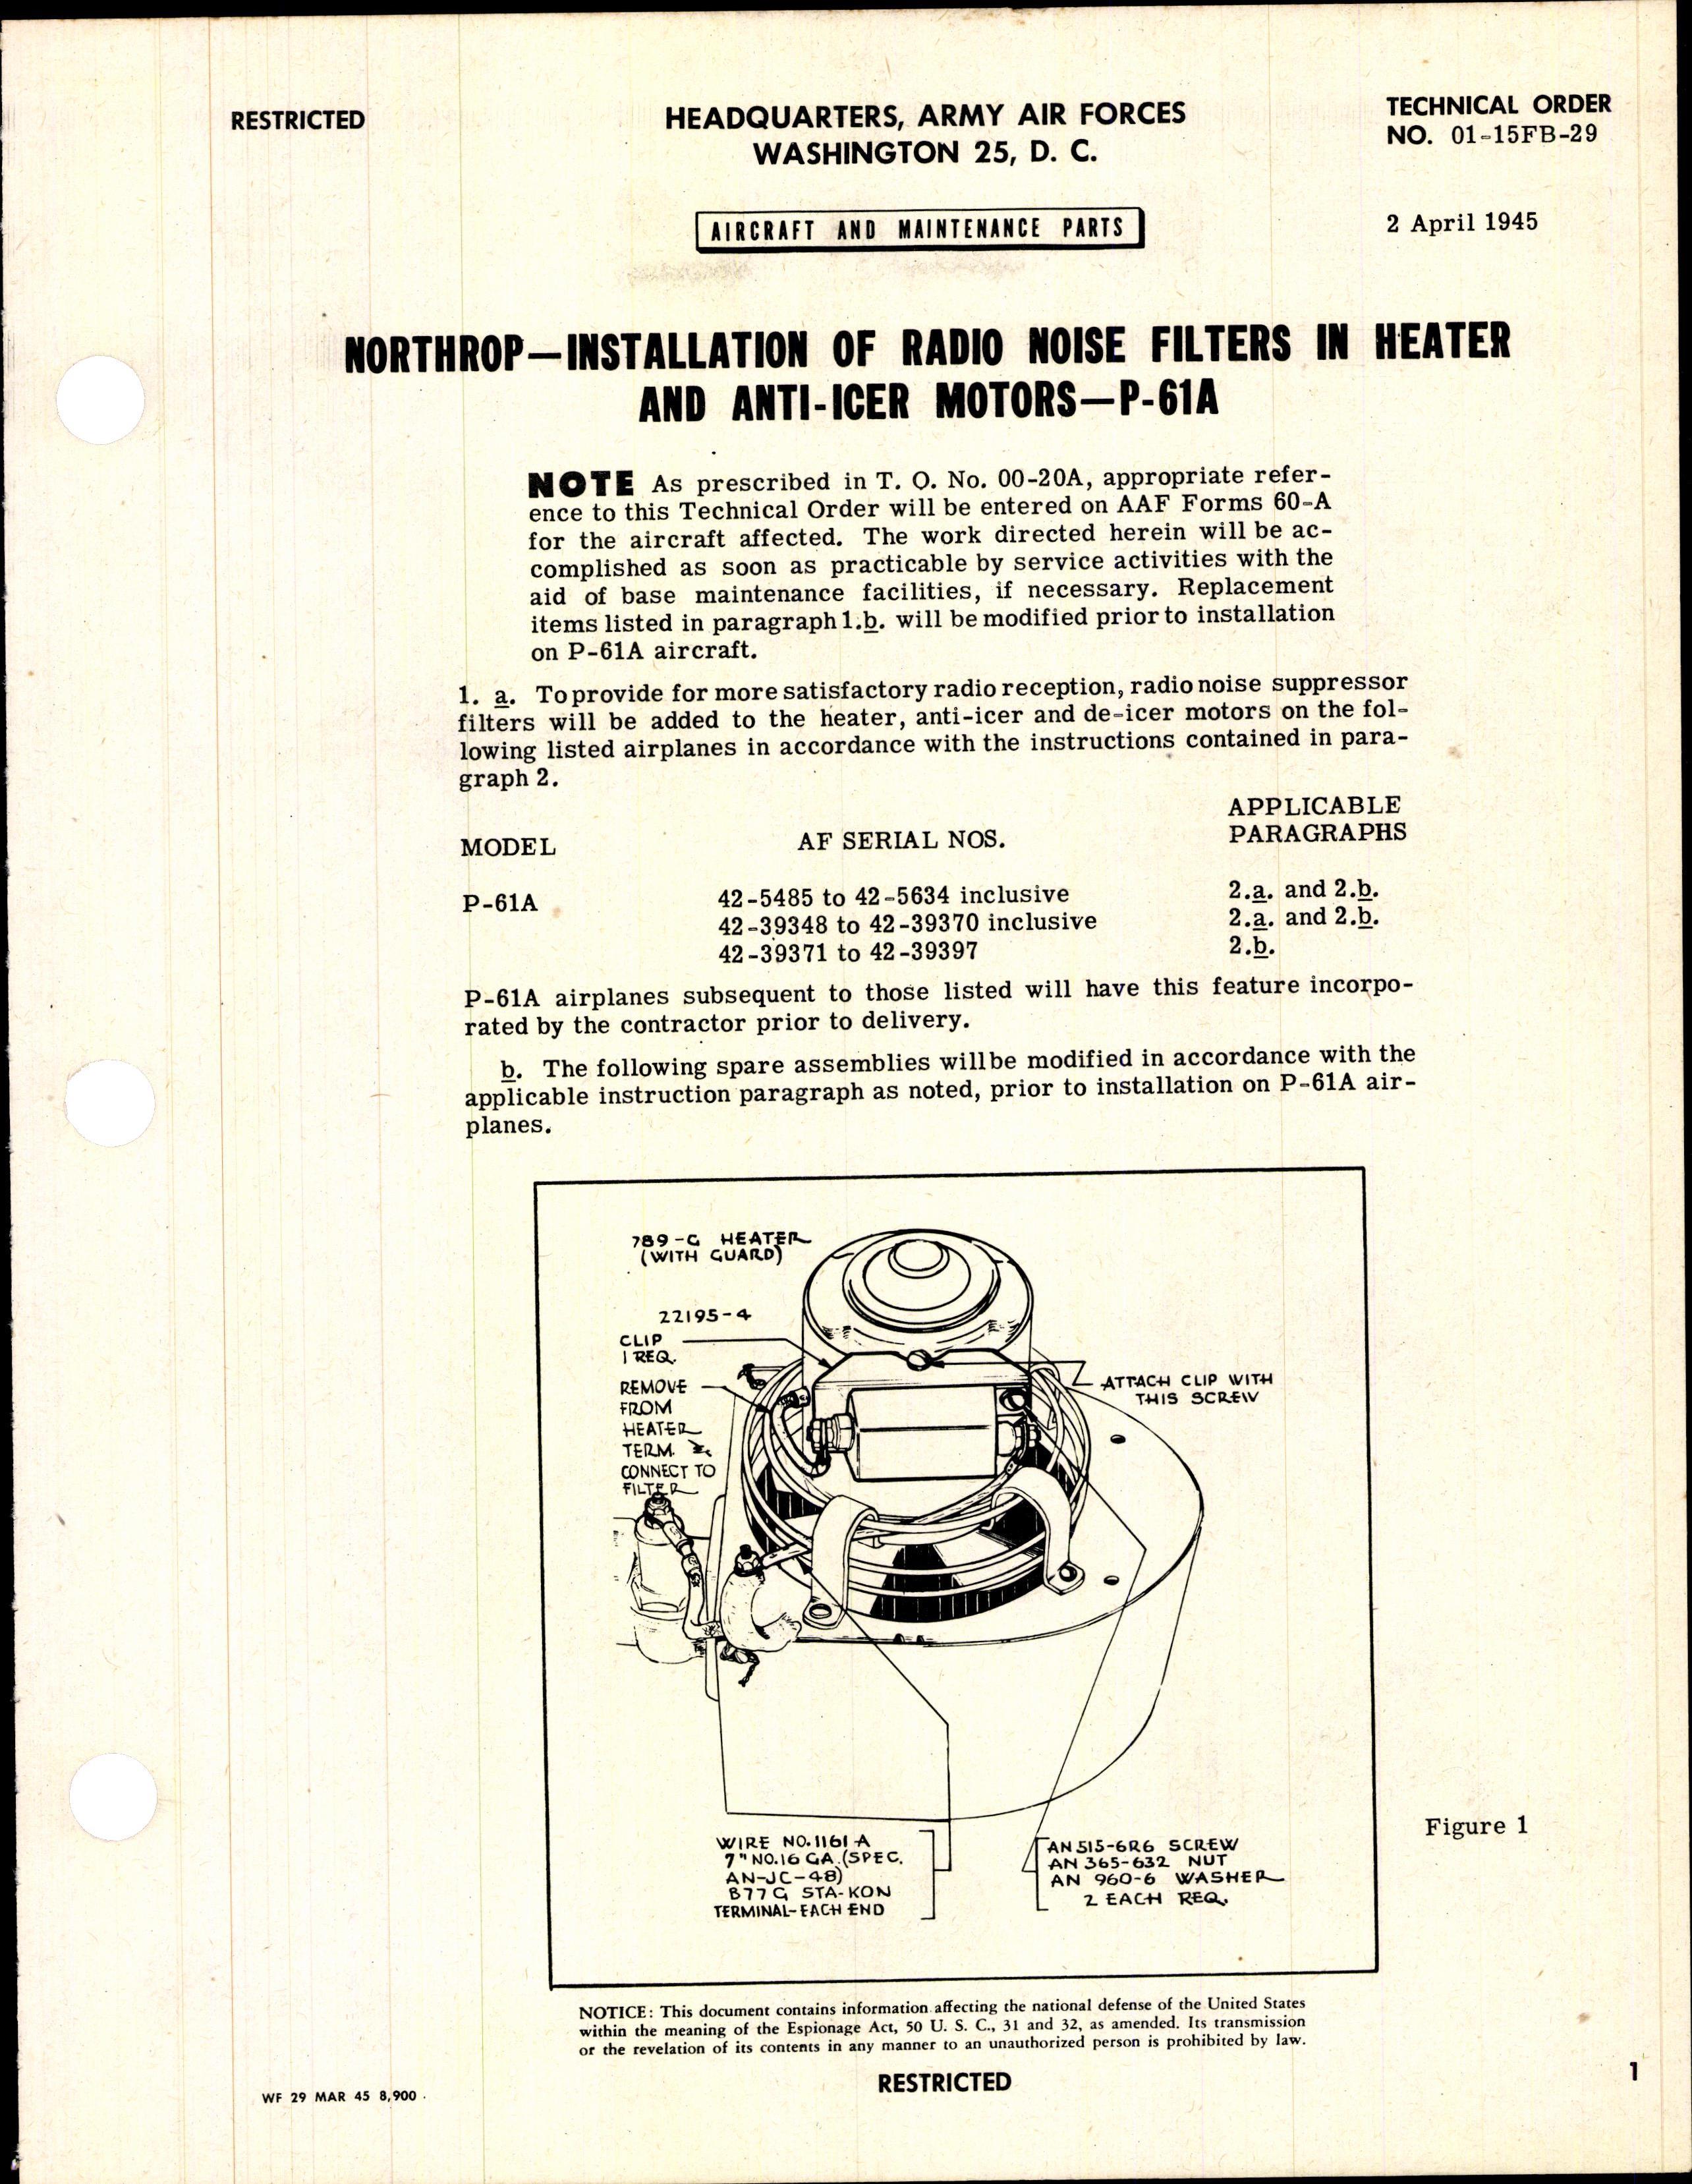 Sample page 1 from AirCorps Library document: Installation of Radio Noise Filters in Heater and Anti-Icer Motors for P-61A